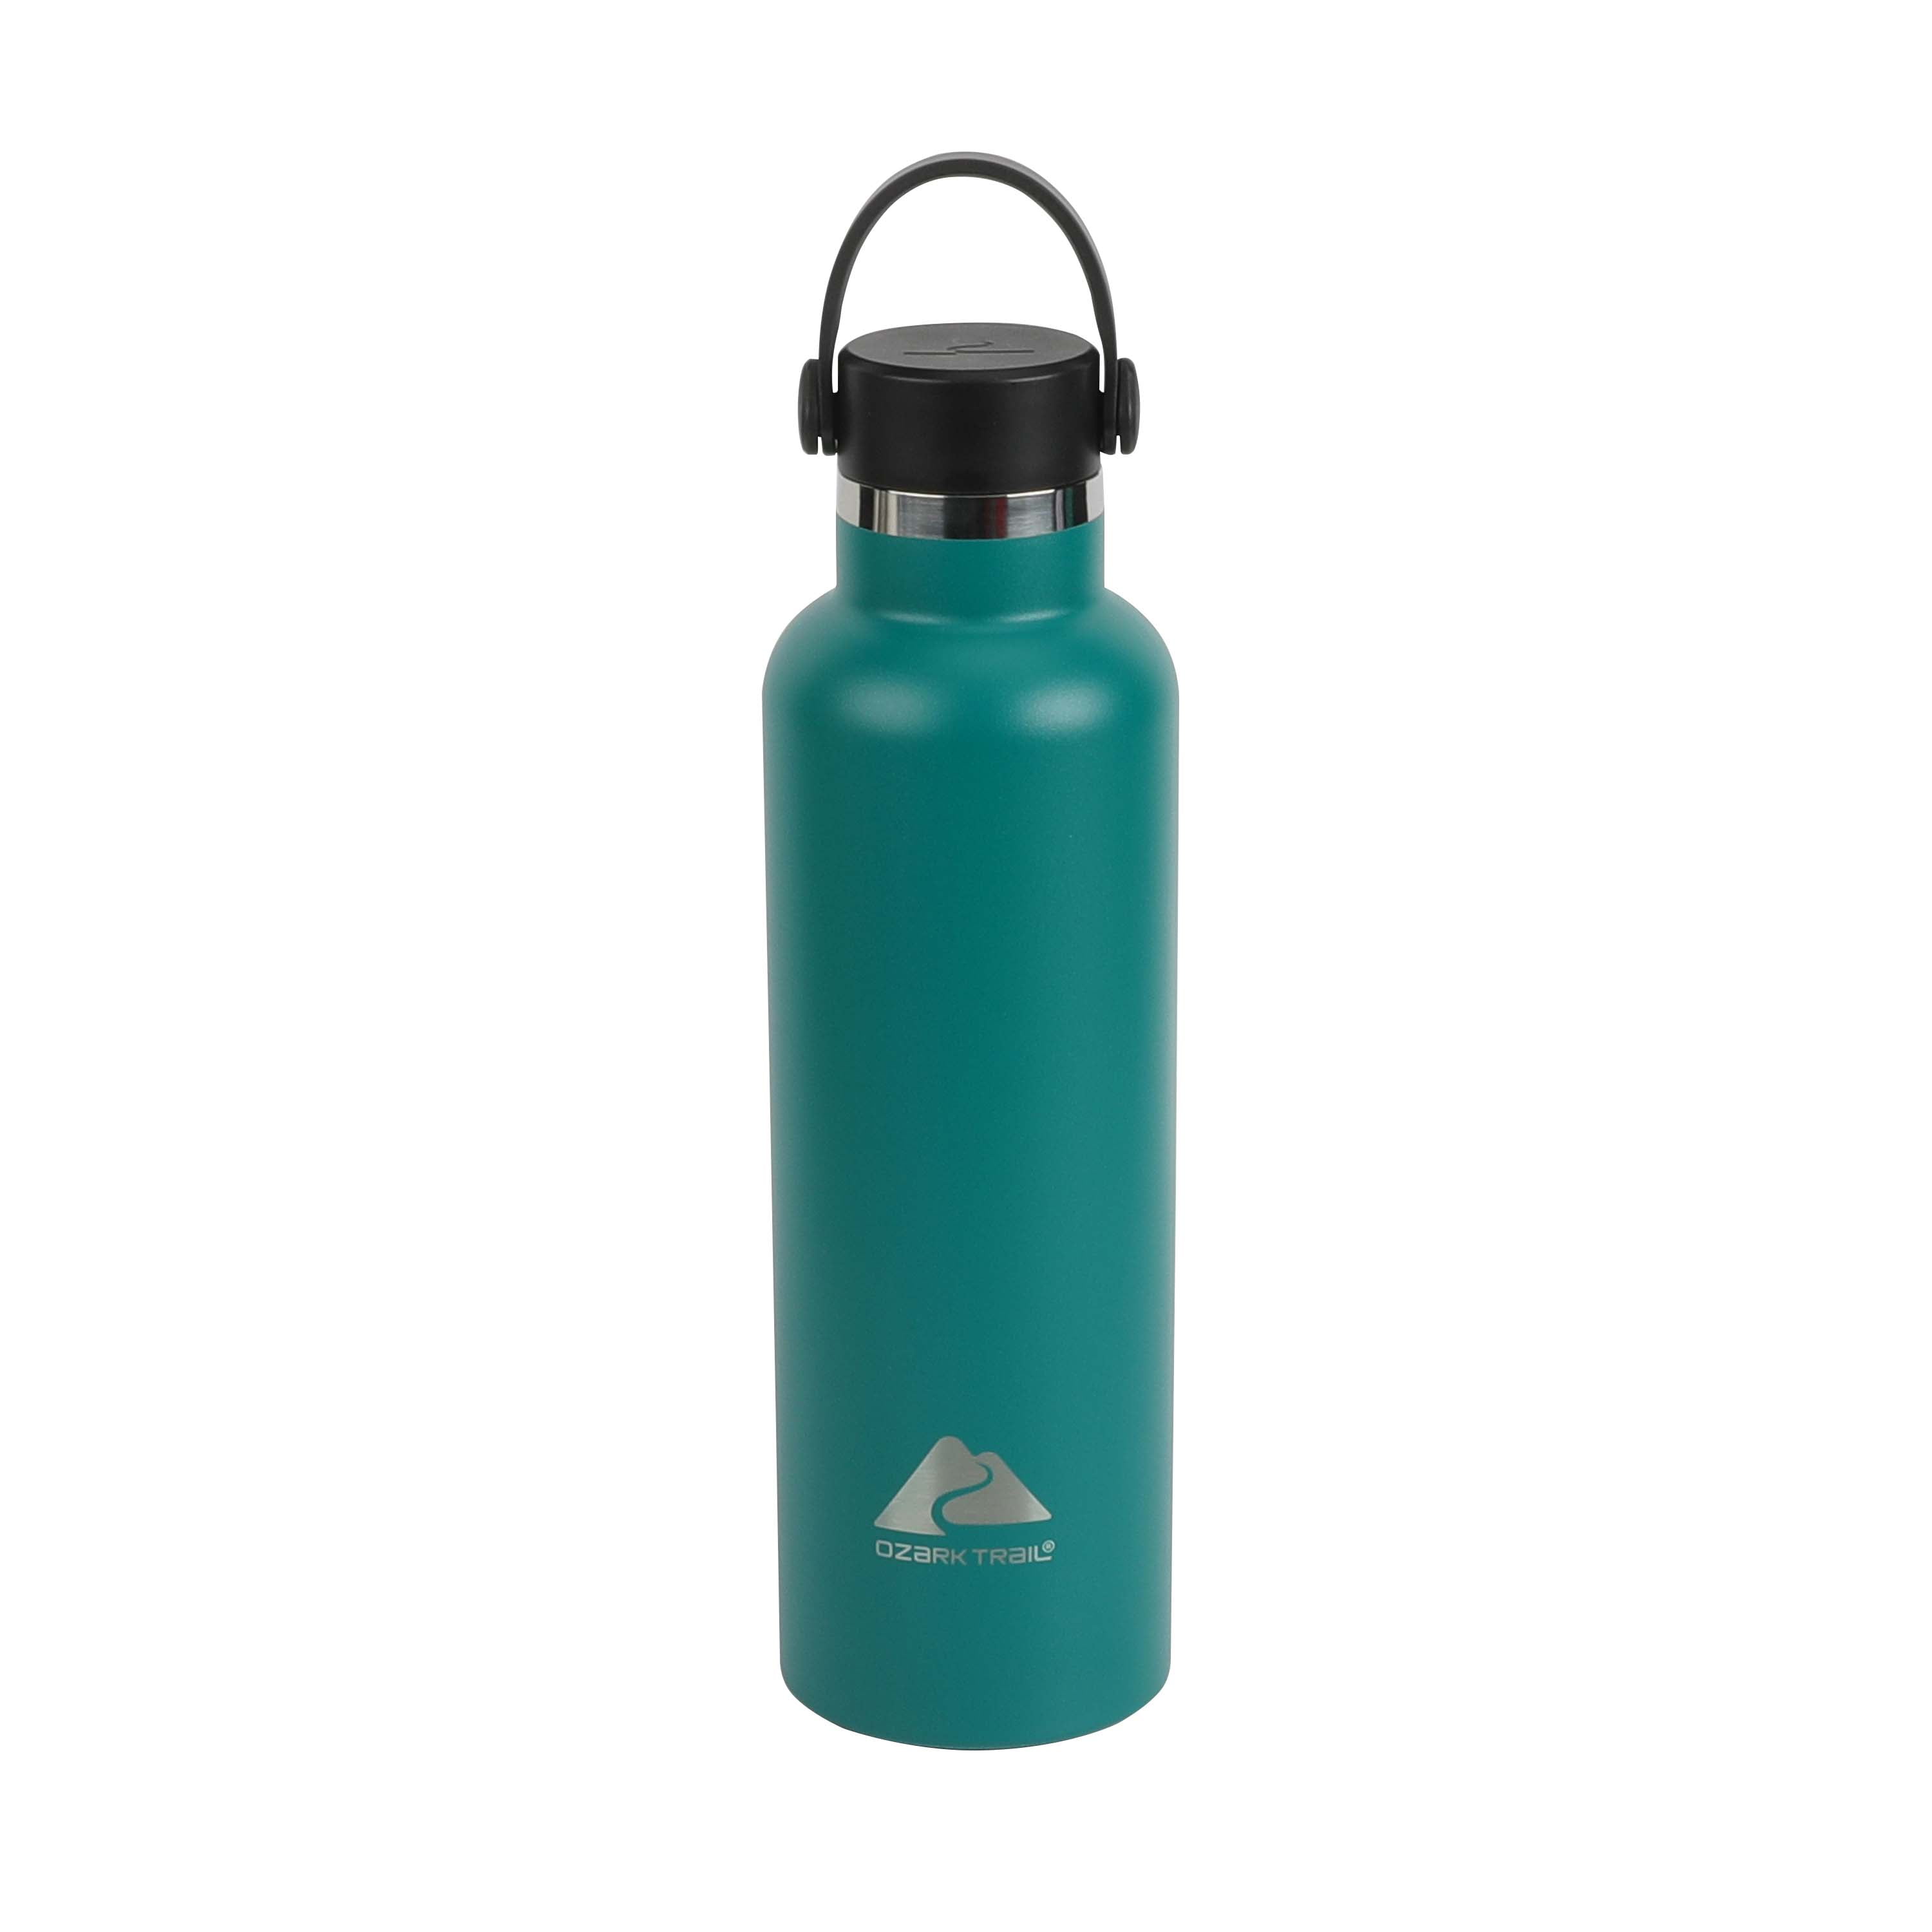 Green Canteen 40 oz. Double Wall Stainless Steel Teal/White Tumbler with Handle (2-Pack)